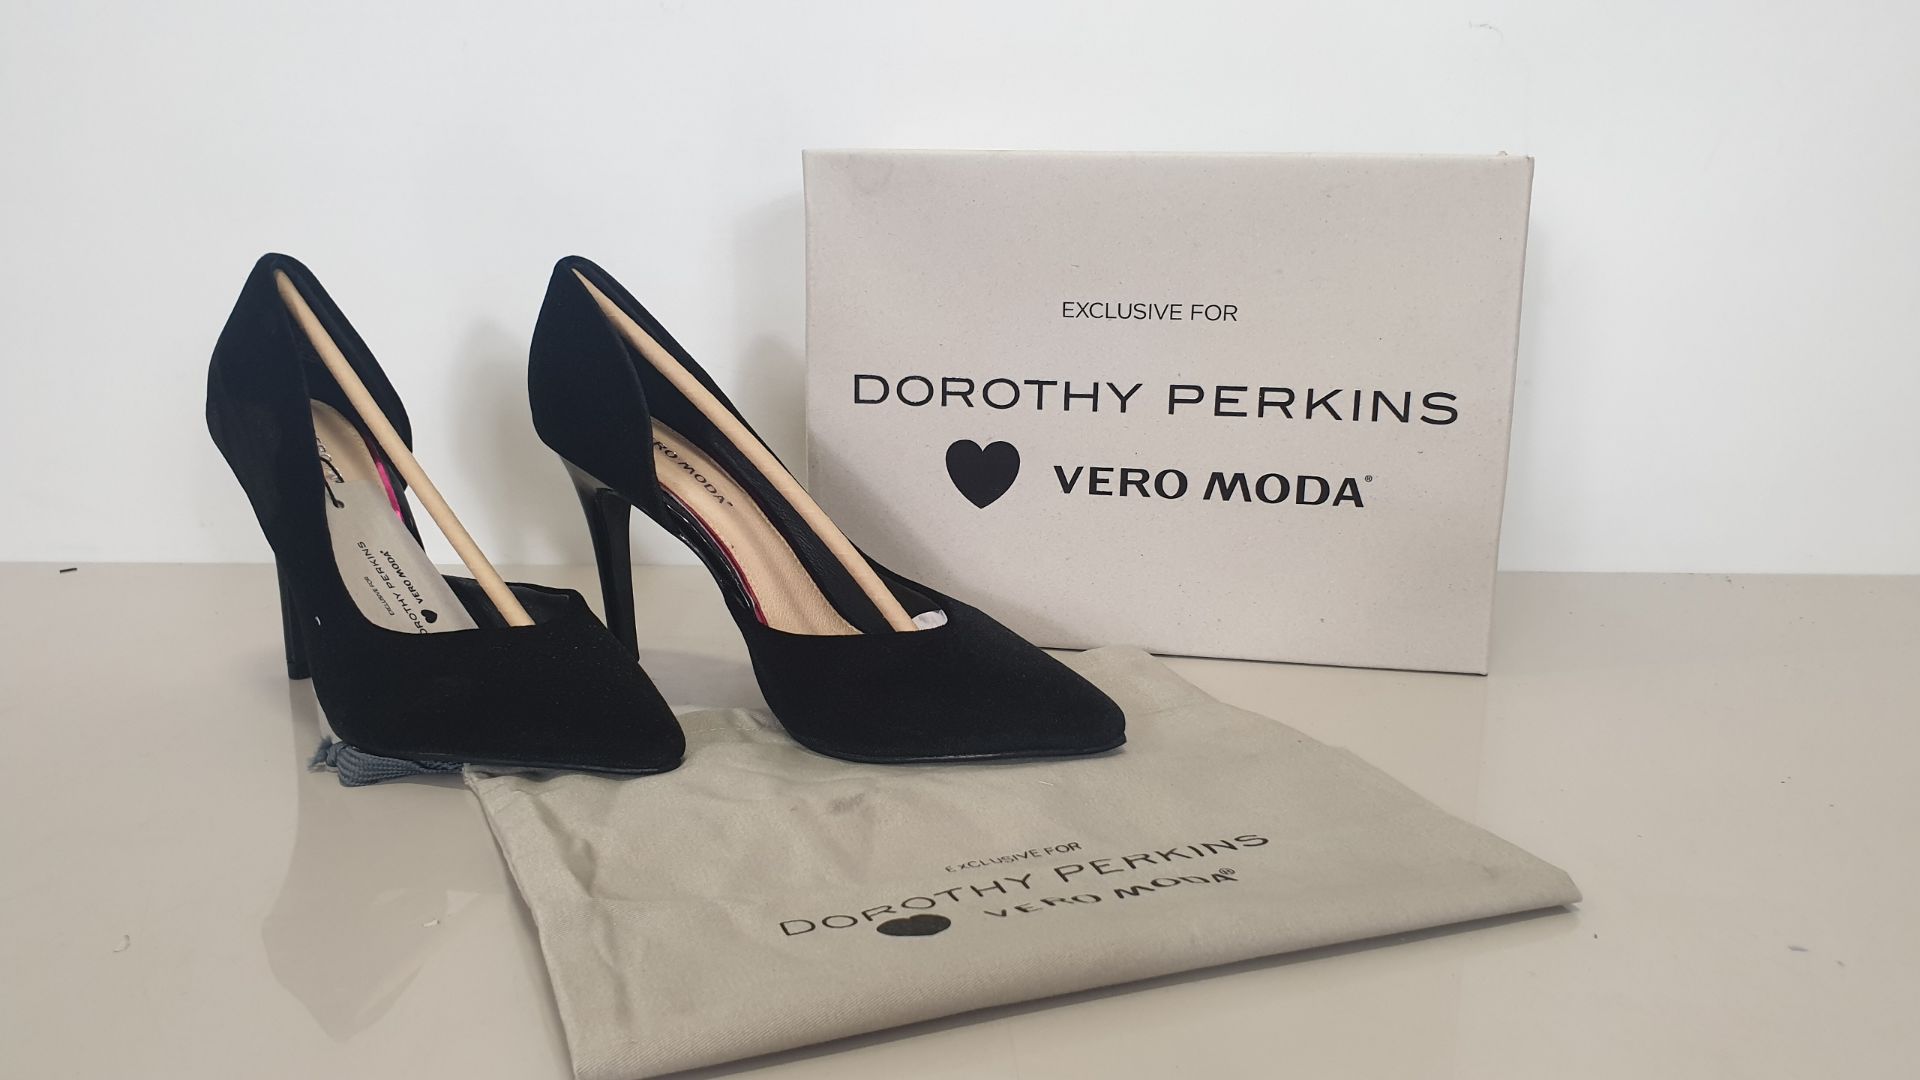 10 X BRAND NEW PAIRS OF PAIRS OF SIZE 6 DOROTHY PERKINS BLACK PIN HEEL SHOES - VERA MODA EXCLUSIVE -